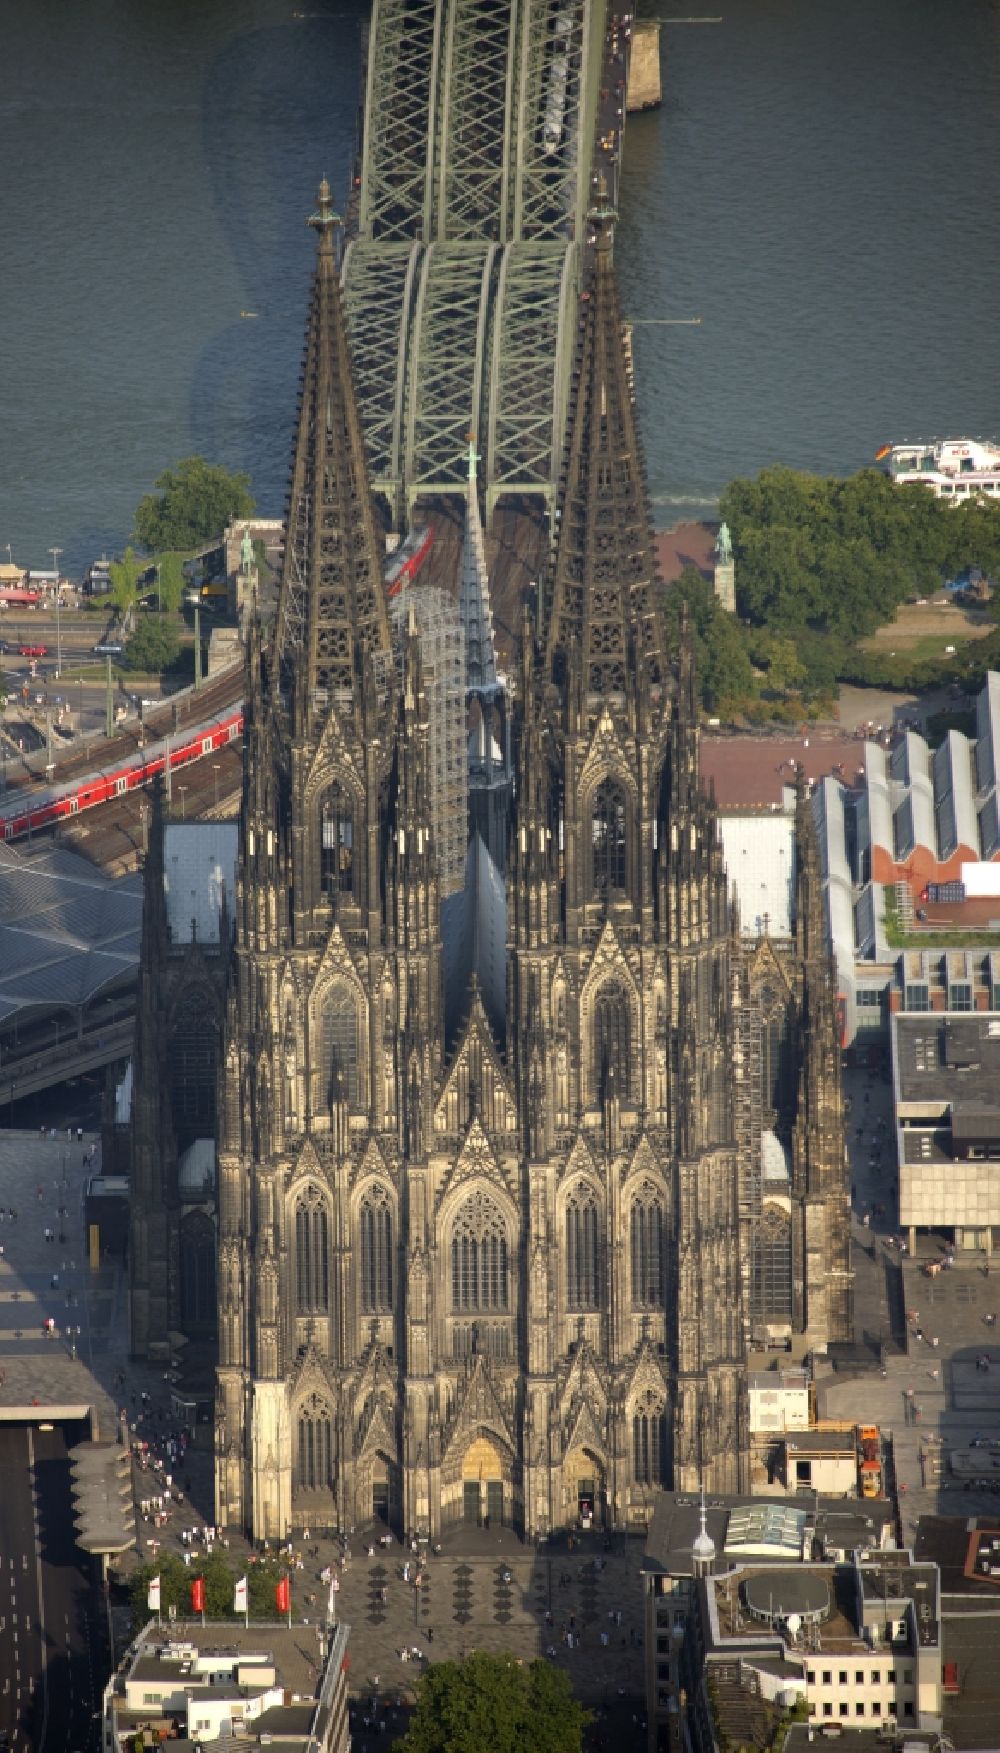 Köln from above - View of the Cologne Cathedral in the center of Cologne, near central station. The Cologne Cathedral is a Roman Catholic church in the Gothic style in Cologne and the Cathedral of the Archdiocese of Cologne. It is the second highest church building in Europe and the third highest in the world